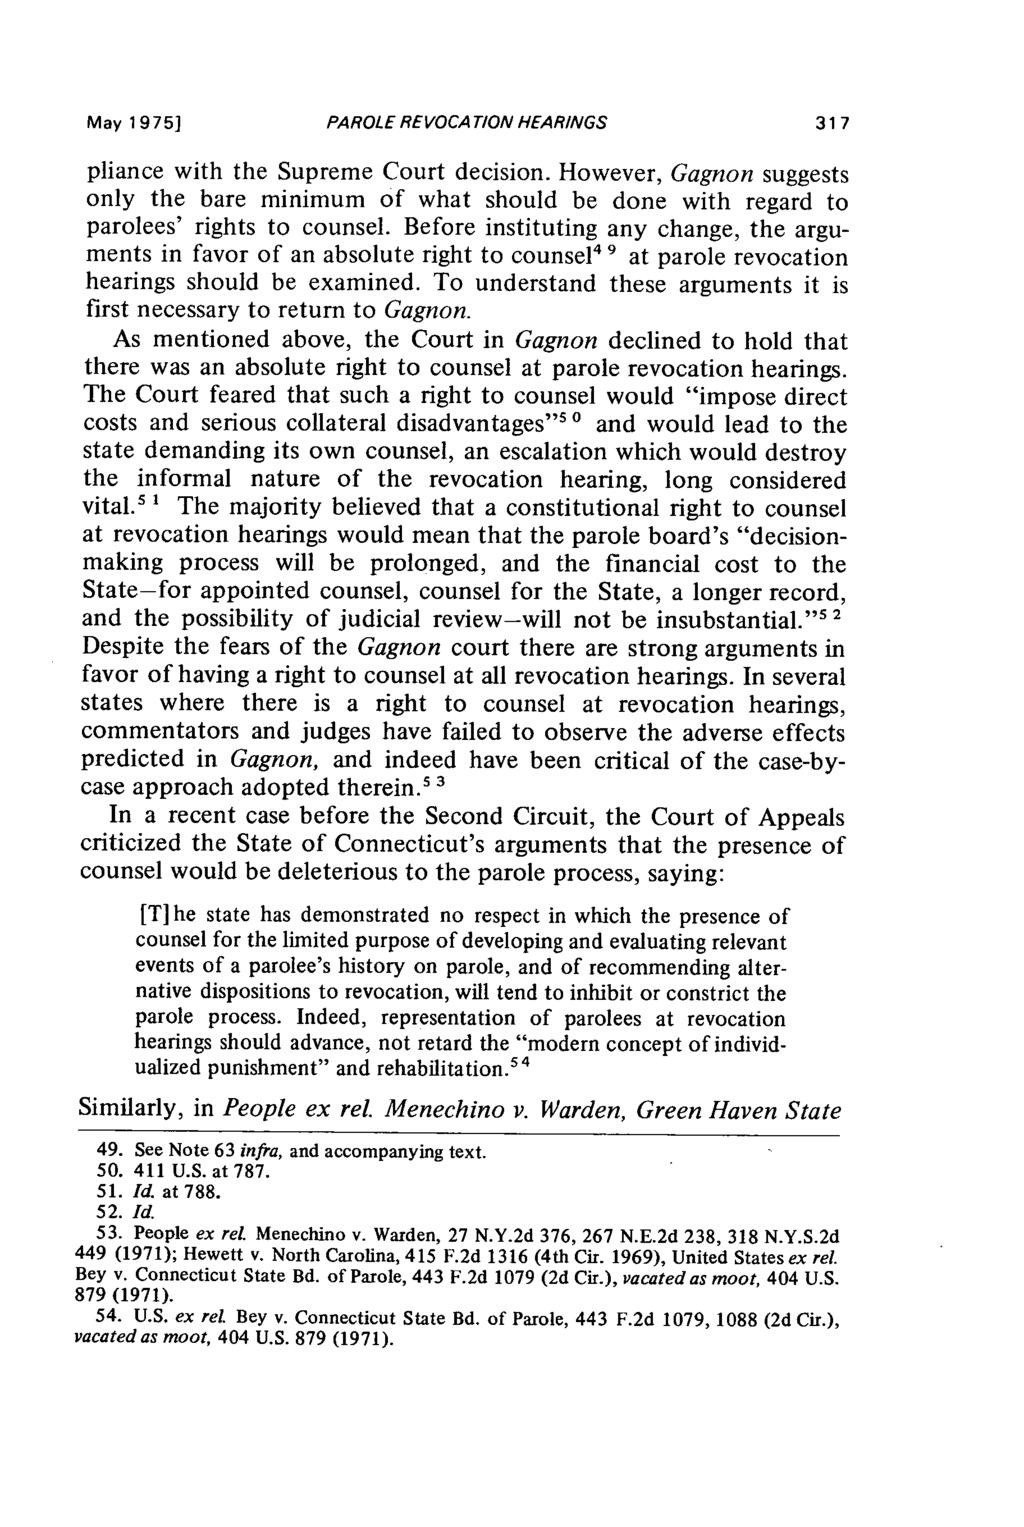 May 1975] PAROLE REVOCA TION HEARINGS pliance with the Supreme Court decision. However, Gagnon suggests only the bare minimum of what should be done with regard to parolees' rights to counsel.